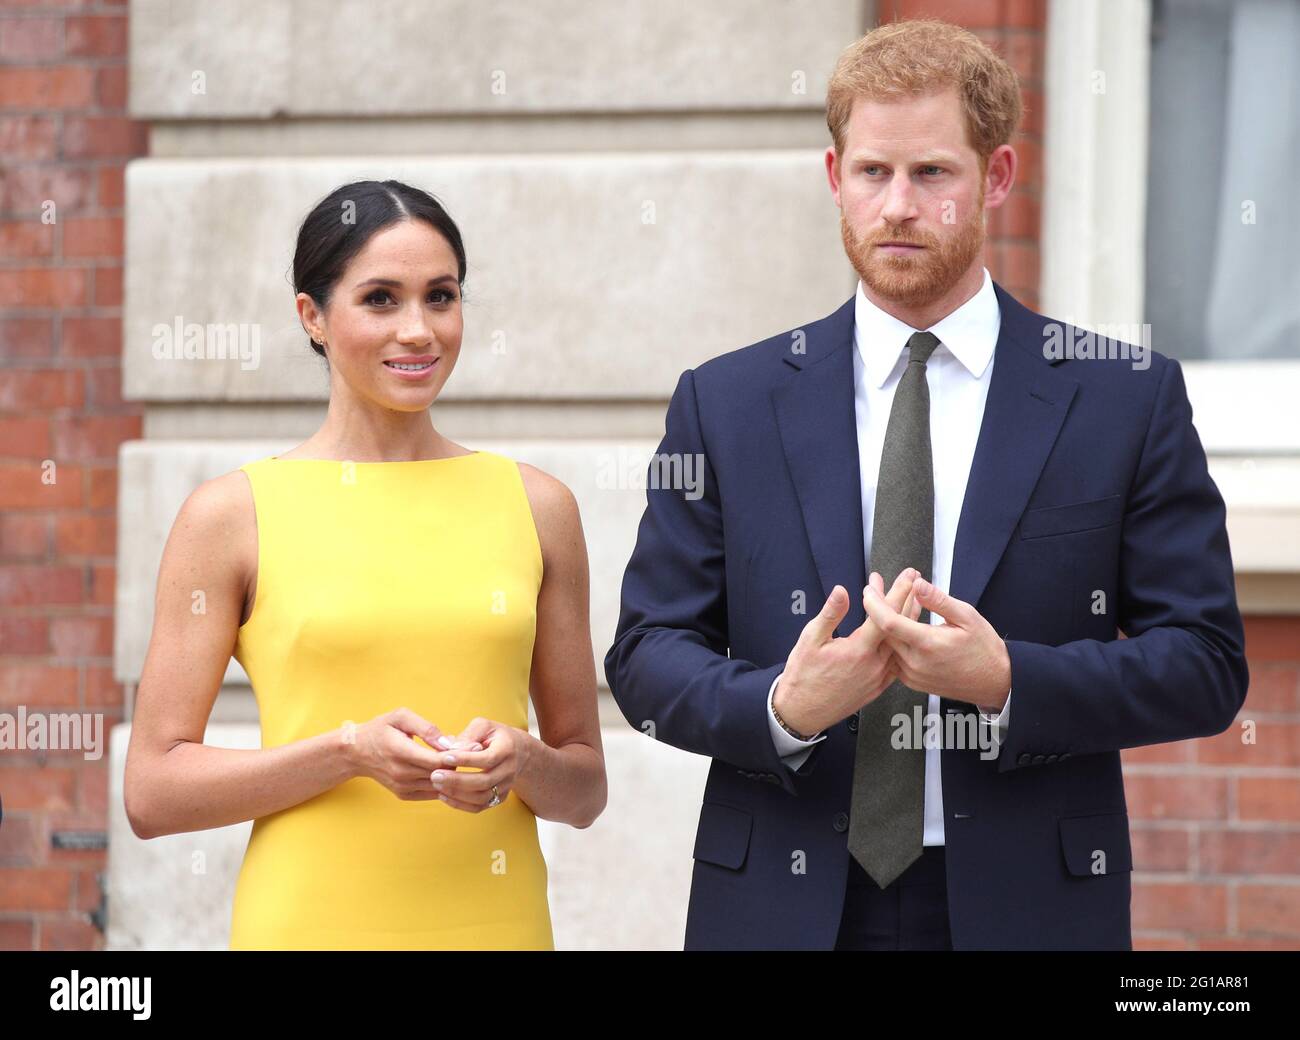 File photo dated 05/07/18 of the Duke and Duchess of Sussex. The Duchess of Sussex gave birth to a 7lb 11oz daughter, Lilibet 'Lili' Diana Mountbatten-Windsor, on Friday in California and both mother and child are healthy and well, Meghan's press secretary said. Issue date: Sunday June 6, 2021. Stock Photo